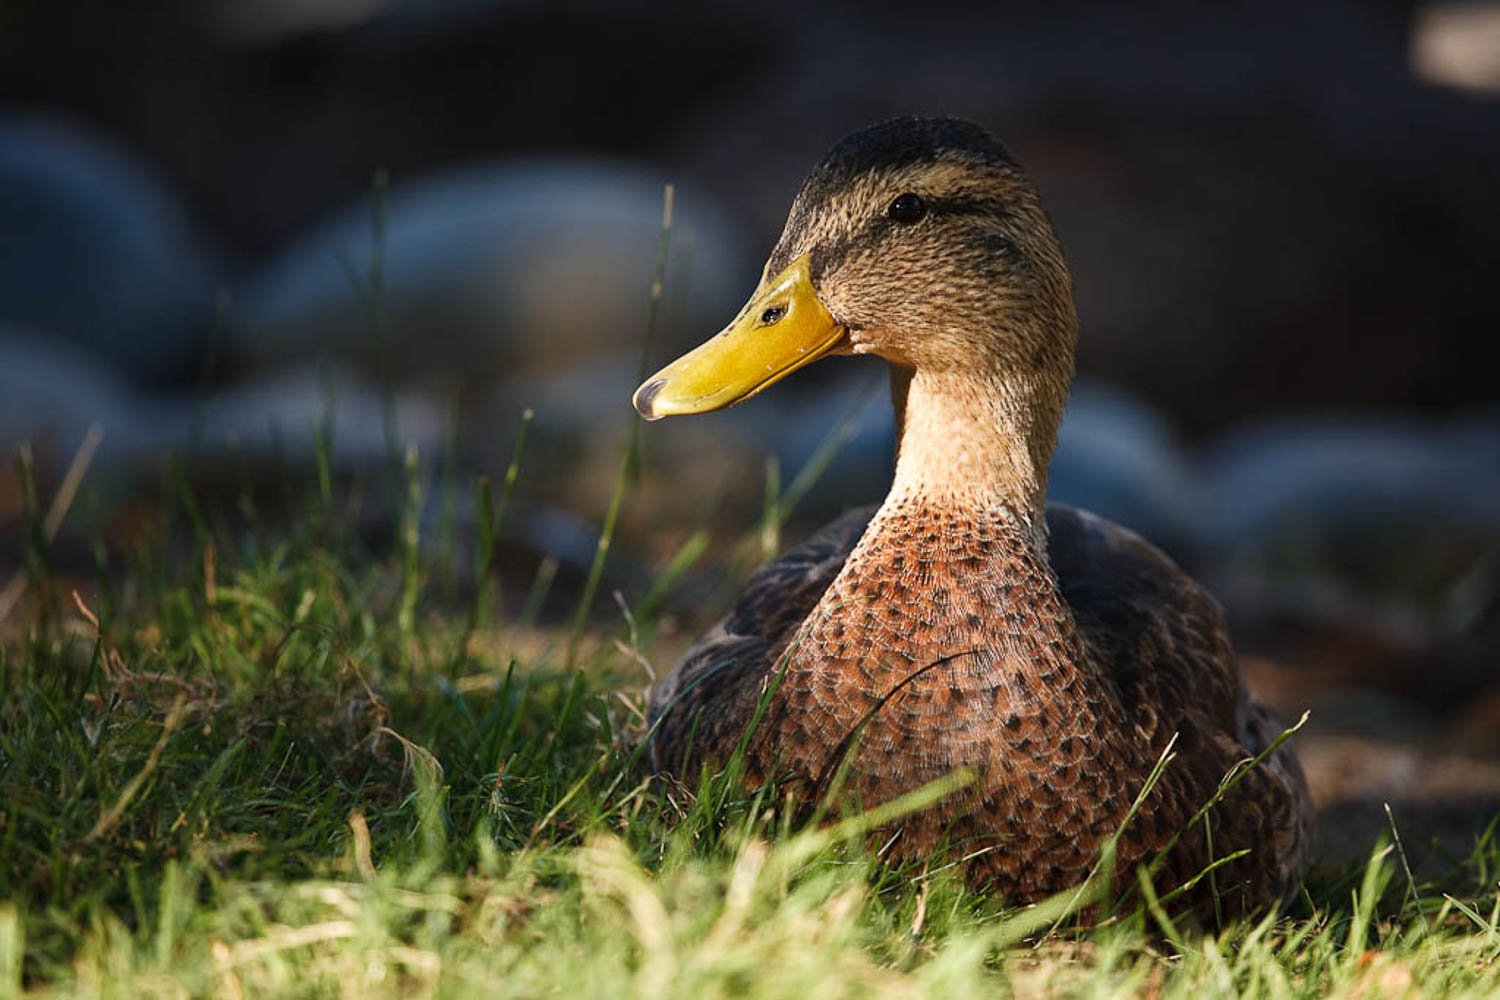 Just a duck